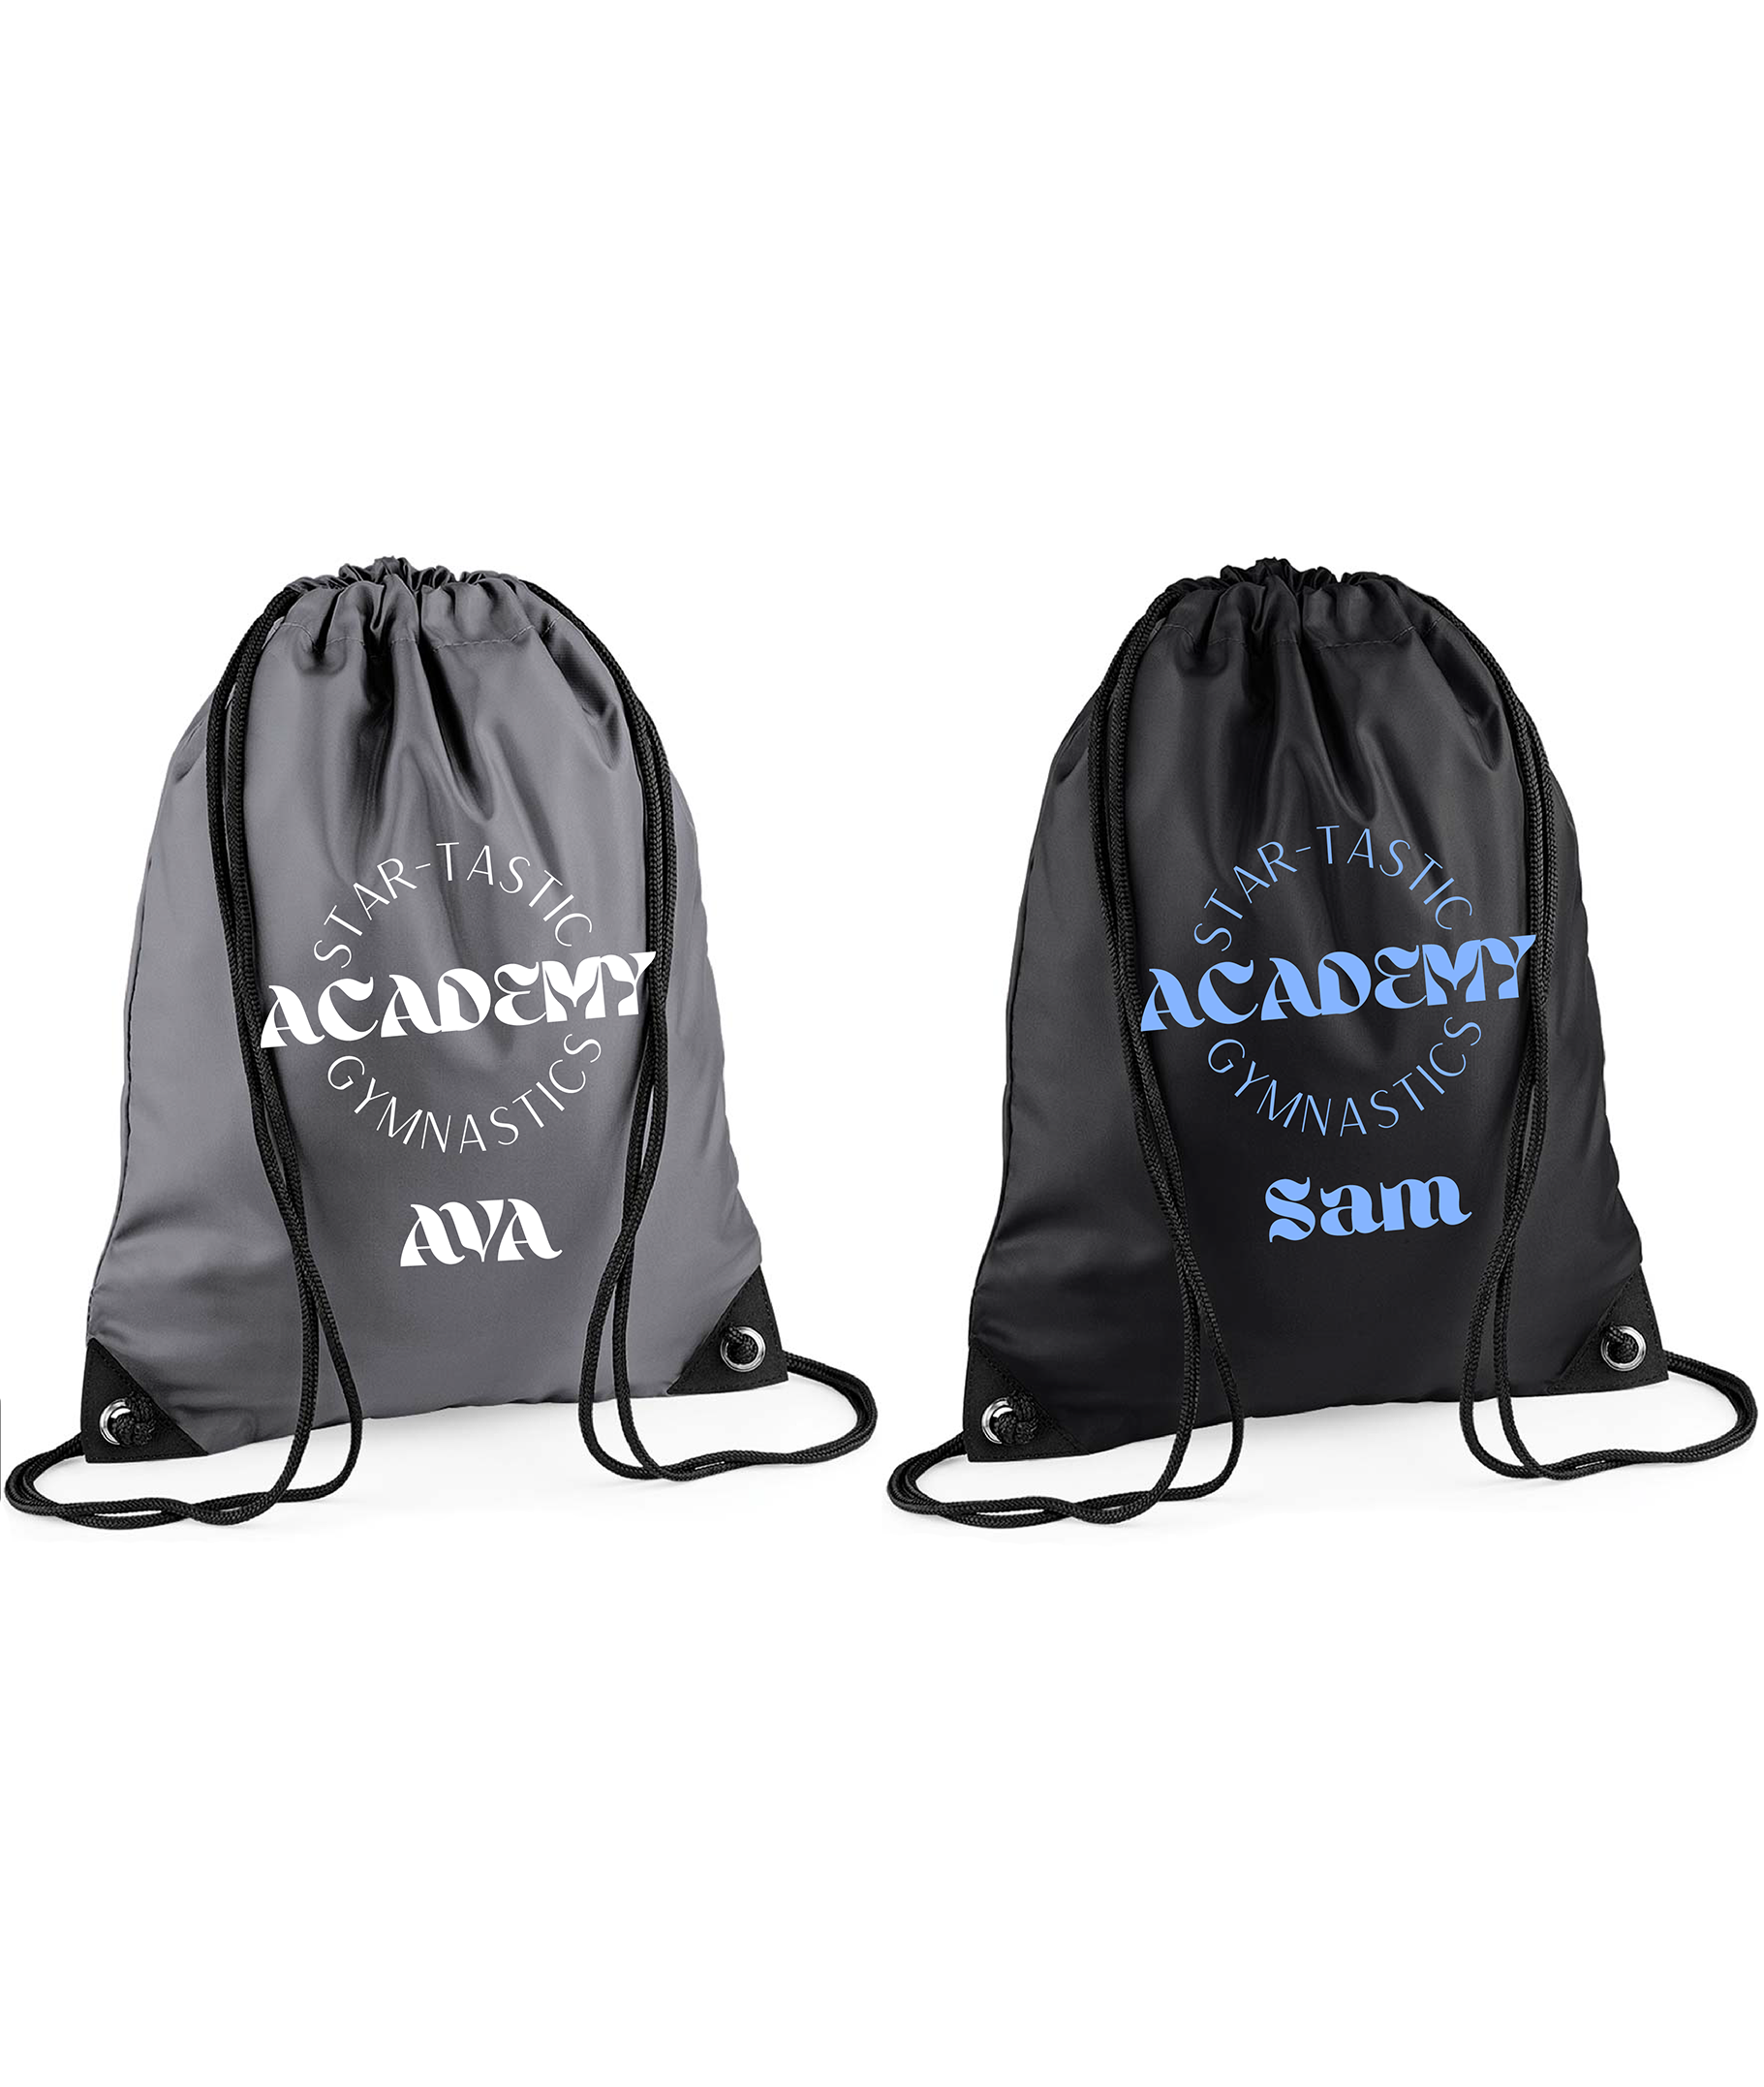 MINI Spooky Bat Academy Bag – Black with Shiny Black with glitter – Cotton  Candy Feet